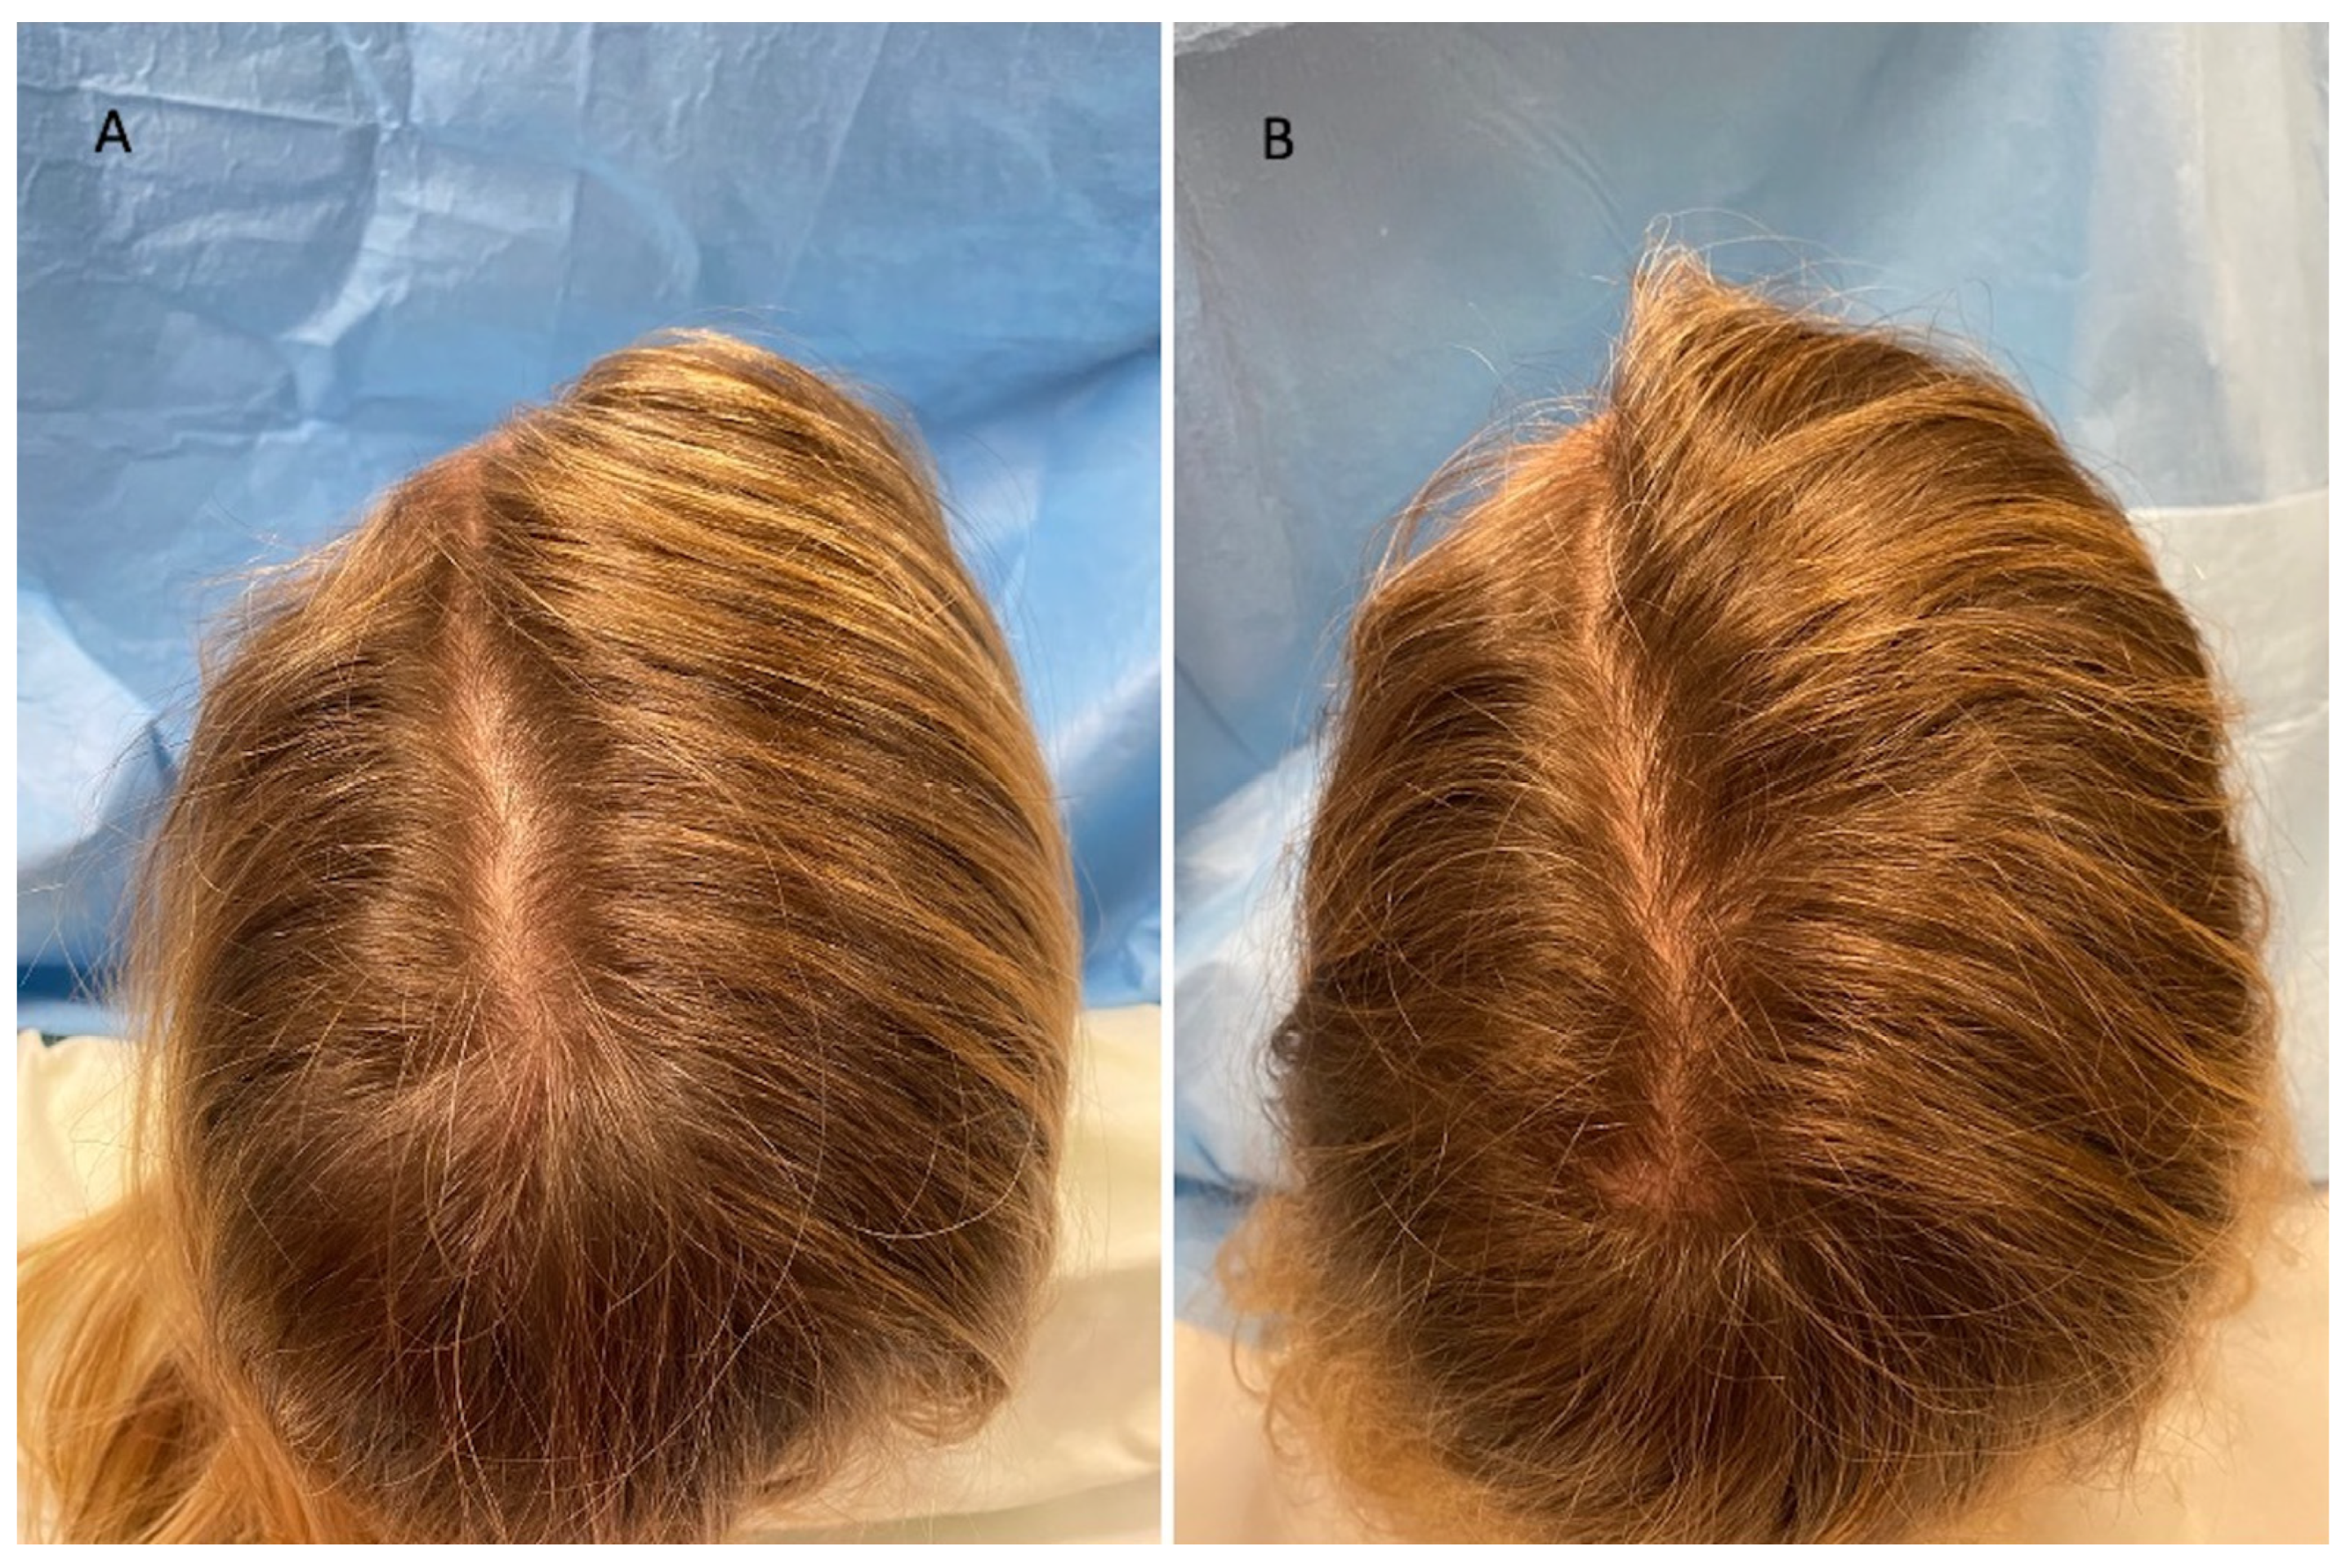 JCM | Free Full-Text | Preliminary Investigation on Micro-Needling with  Low-Level LED Therapy and Growth Factors in Hair Loss Related to COVID-19